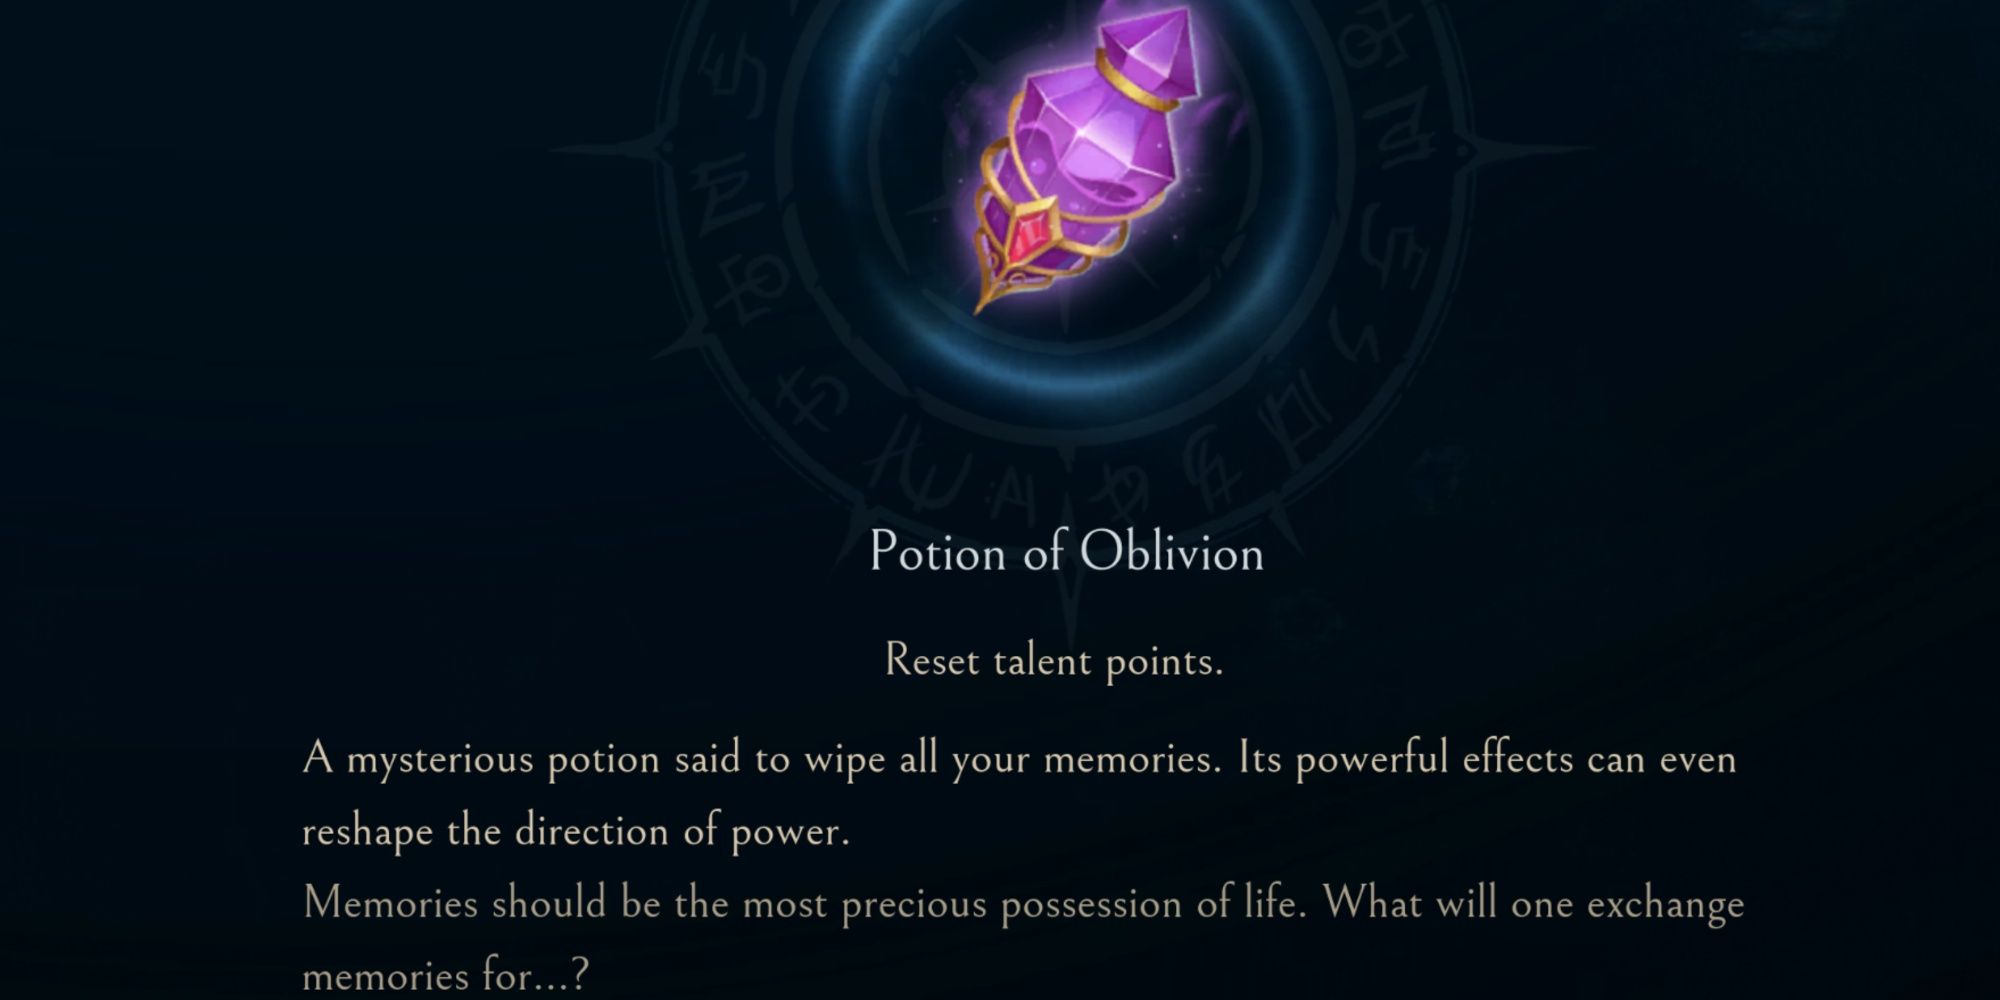 The Potion of Oblivion Consumable Item in Afterimage, allowing Renee to Reset her Talent Points